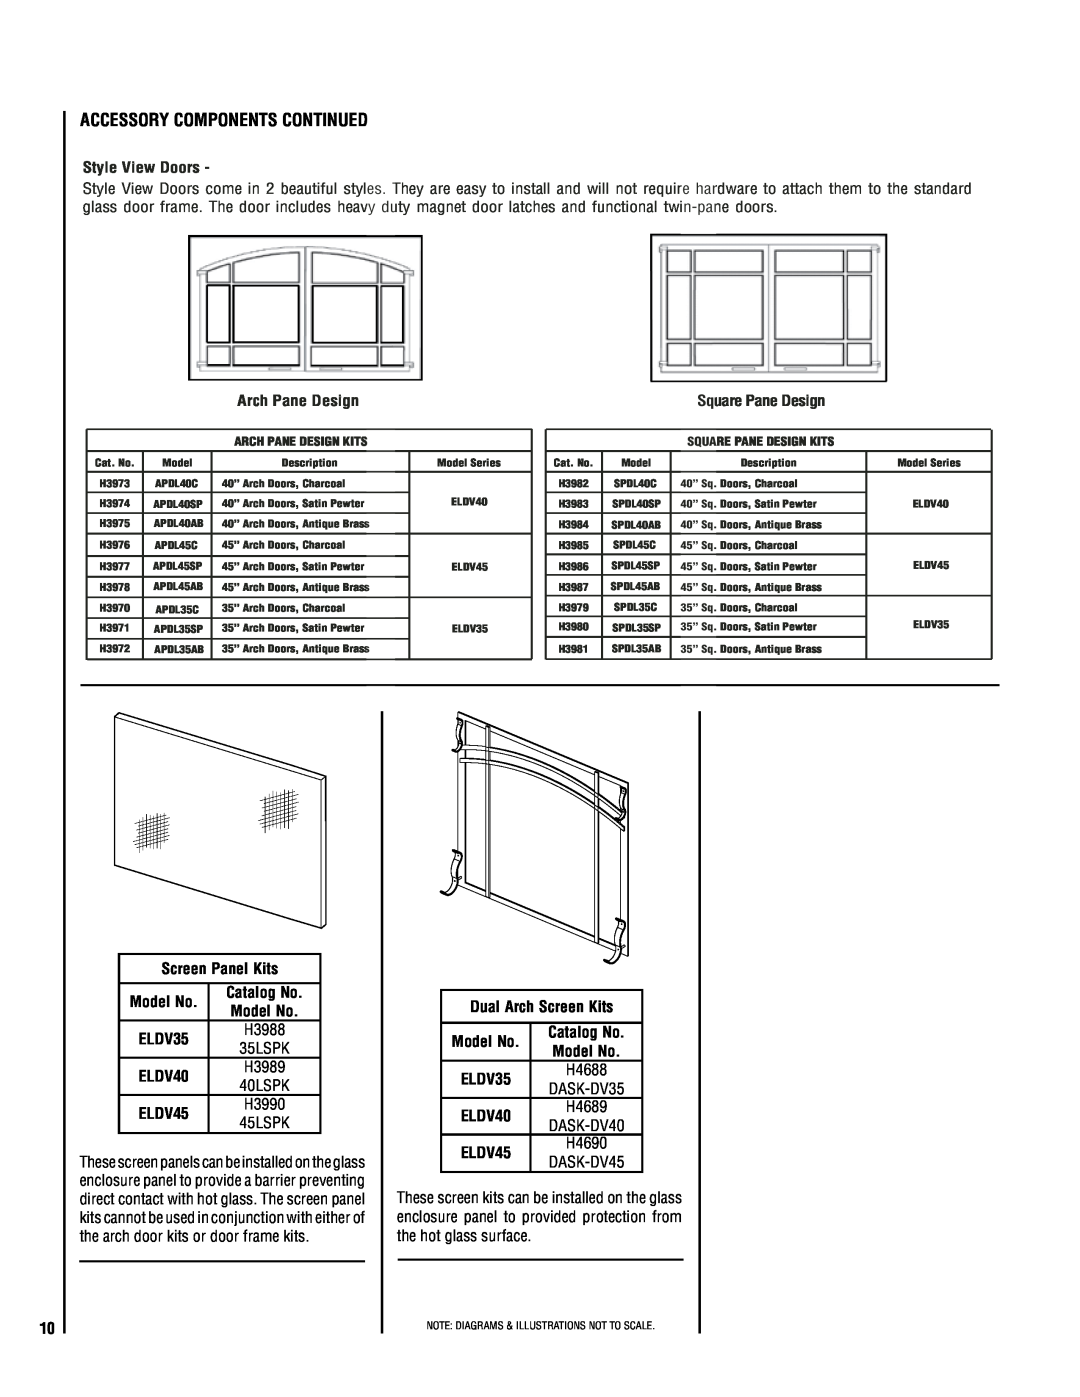 Lennox Hearth MP53-VDLE Accessory Components Continued, Style View Doors, Arch Pane Design, ELDV45 H3990 45LSPK, H4688 